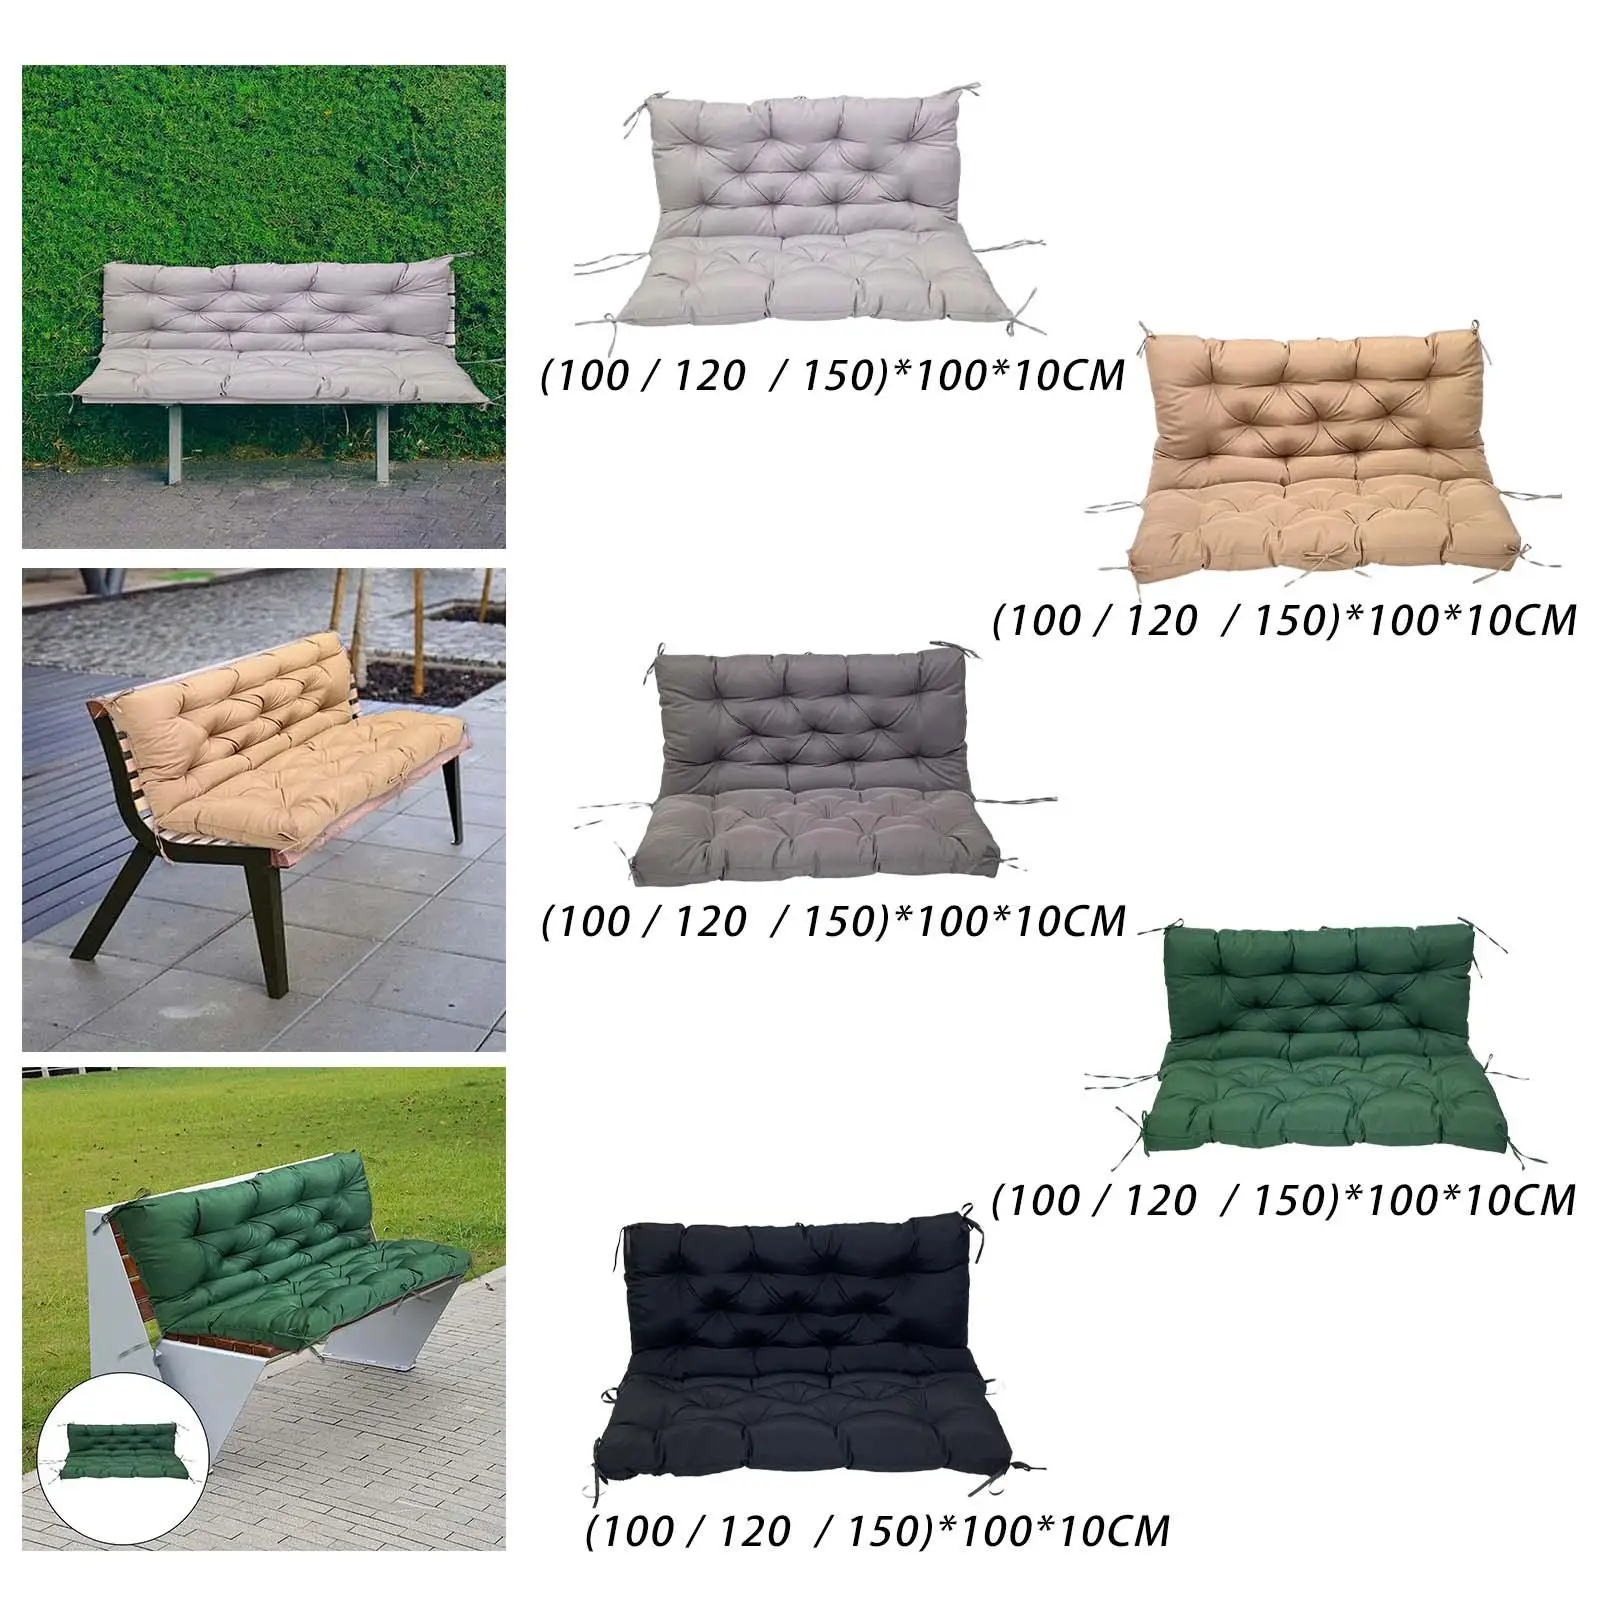 Washable Garden Swing Cushion Patio Chair Pad Removable Hammock Chair Cushions for Home Outdoor Patio Indoor Hammock Swing Chair